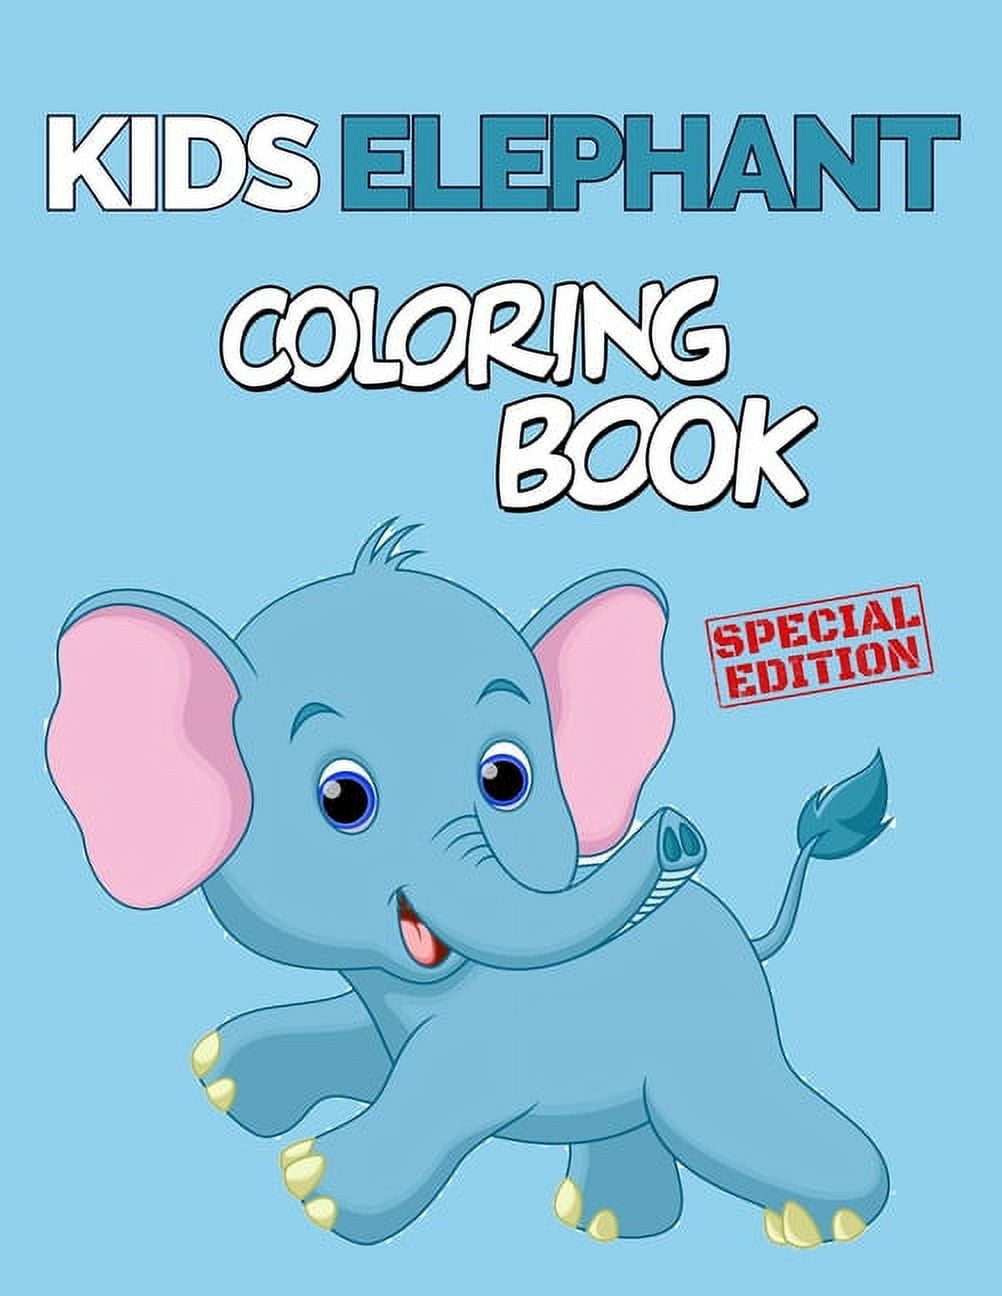 Cutie Animals: Coloring Books For Kids Ages 8-12 : A Funny Coloring Pages  for Animal Lovers for Stress Relief & Relaxation (Series #2) (Paperback) 